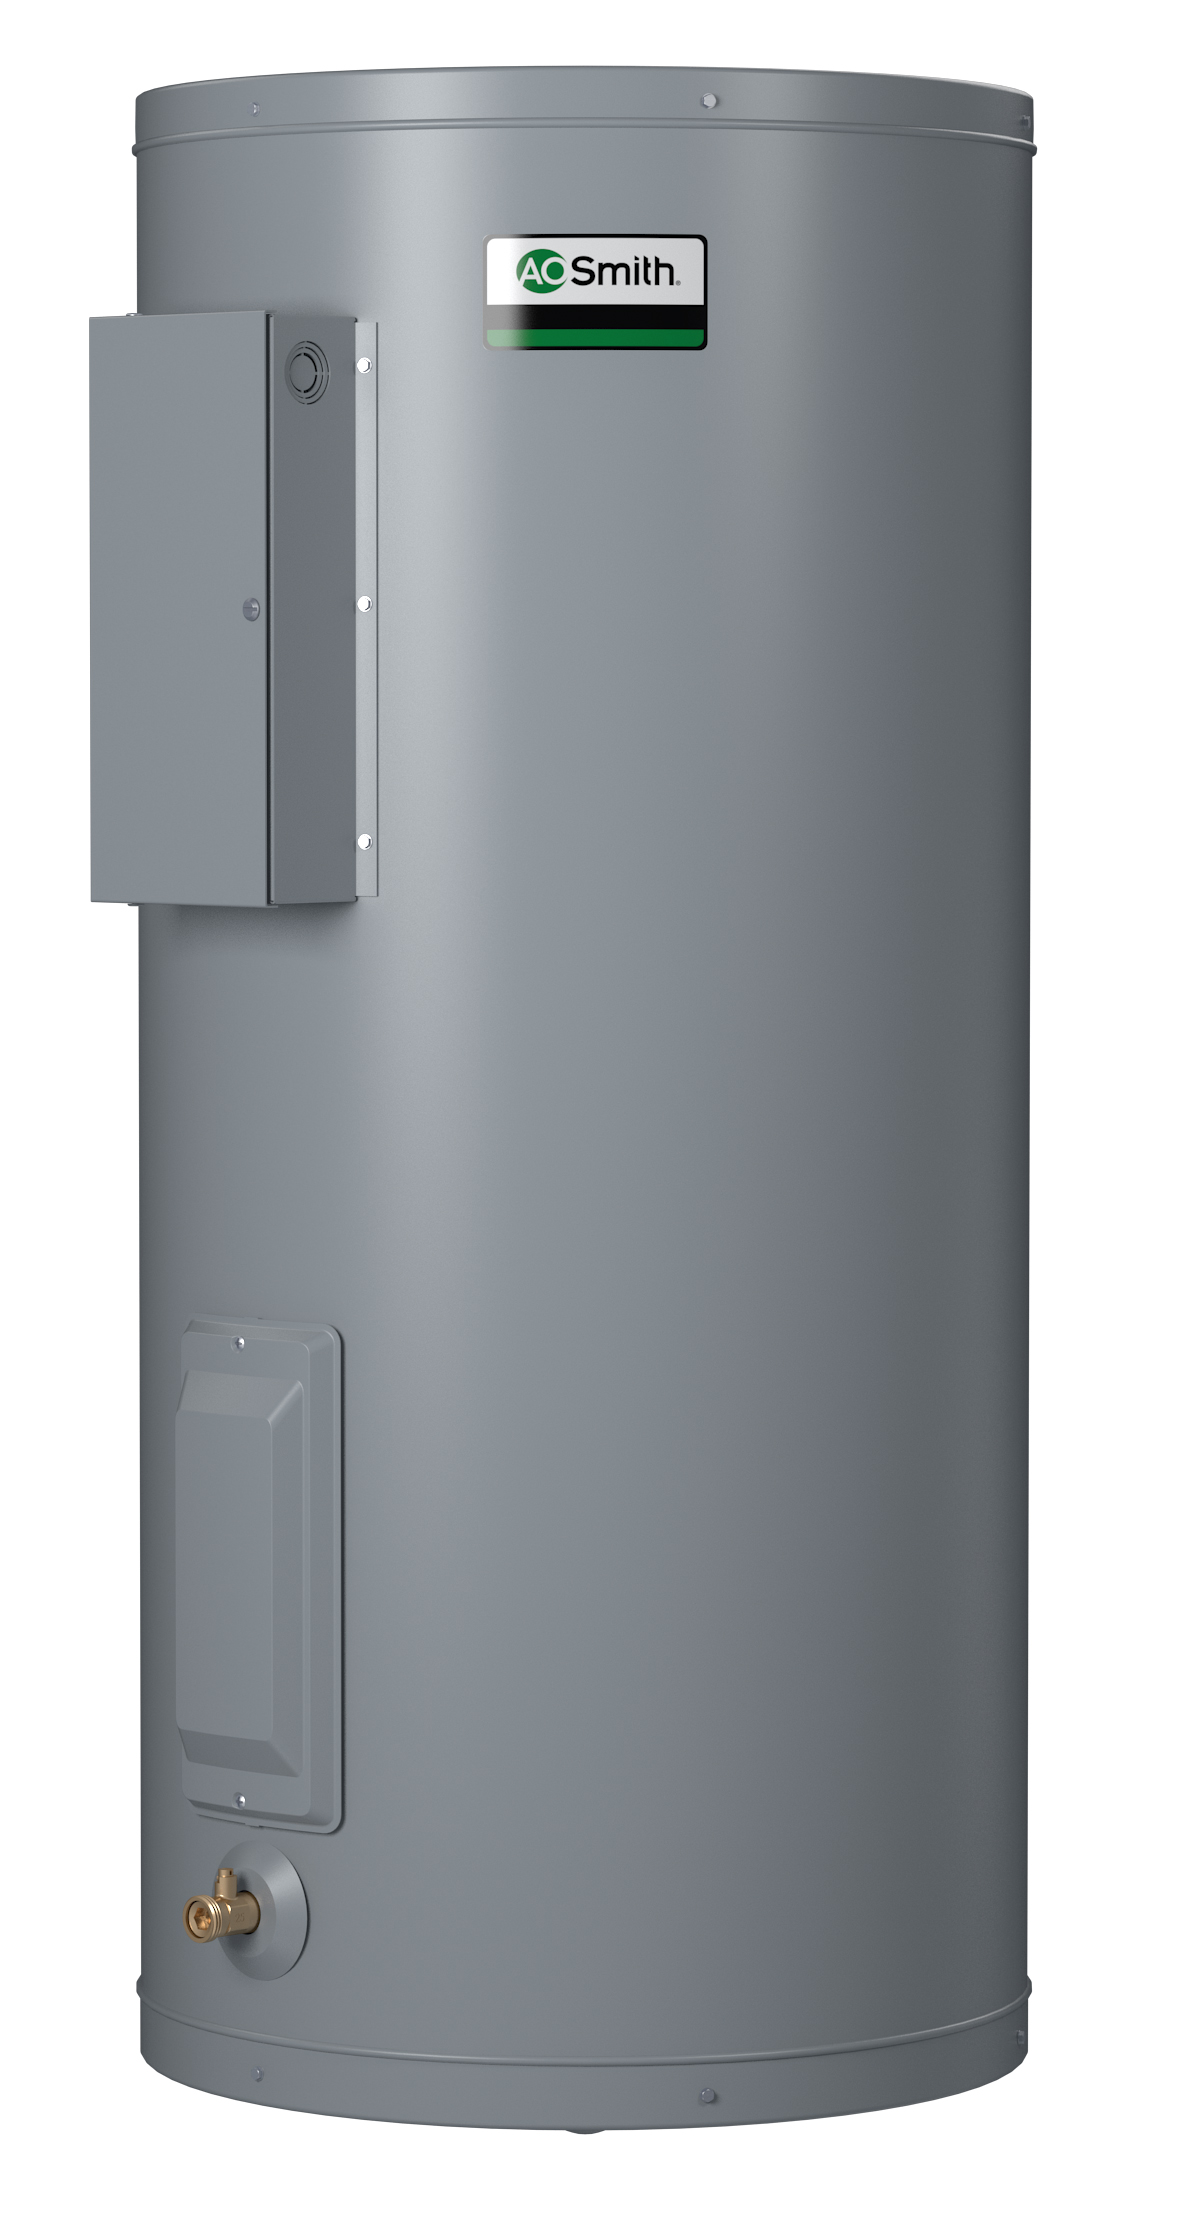 AO SMITH DEL-30D:36 GALLONS, 4.0KW, 240 VOLT, 1 PHASE, (2-4000 WATT ELEMENTS, NON-SIMULTANEOUS WIRING), DURA-POWER, LIGHT DUTY COMMERCIAL ELECTRIC WATER HEATER